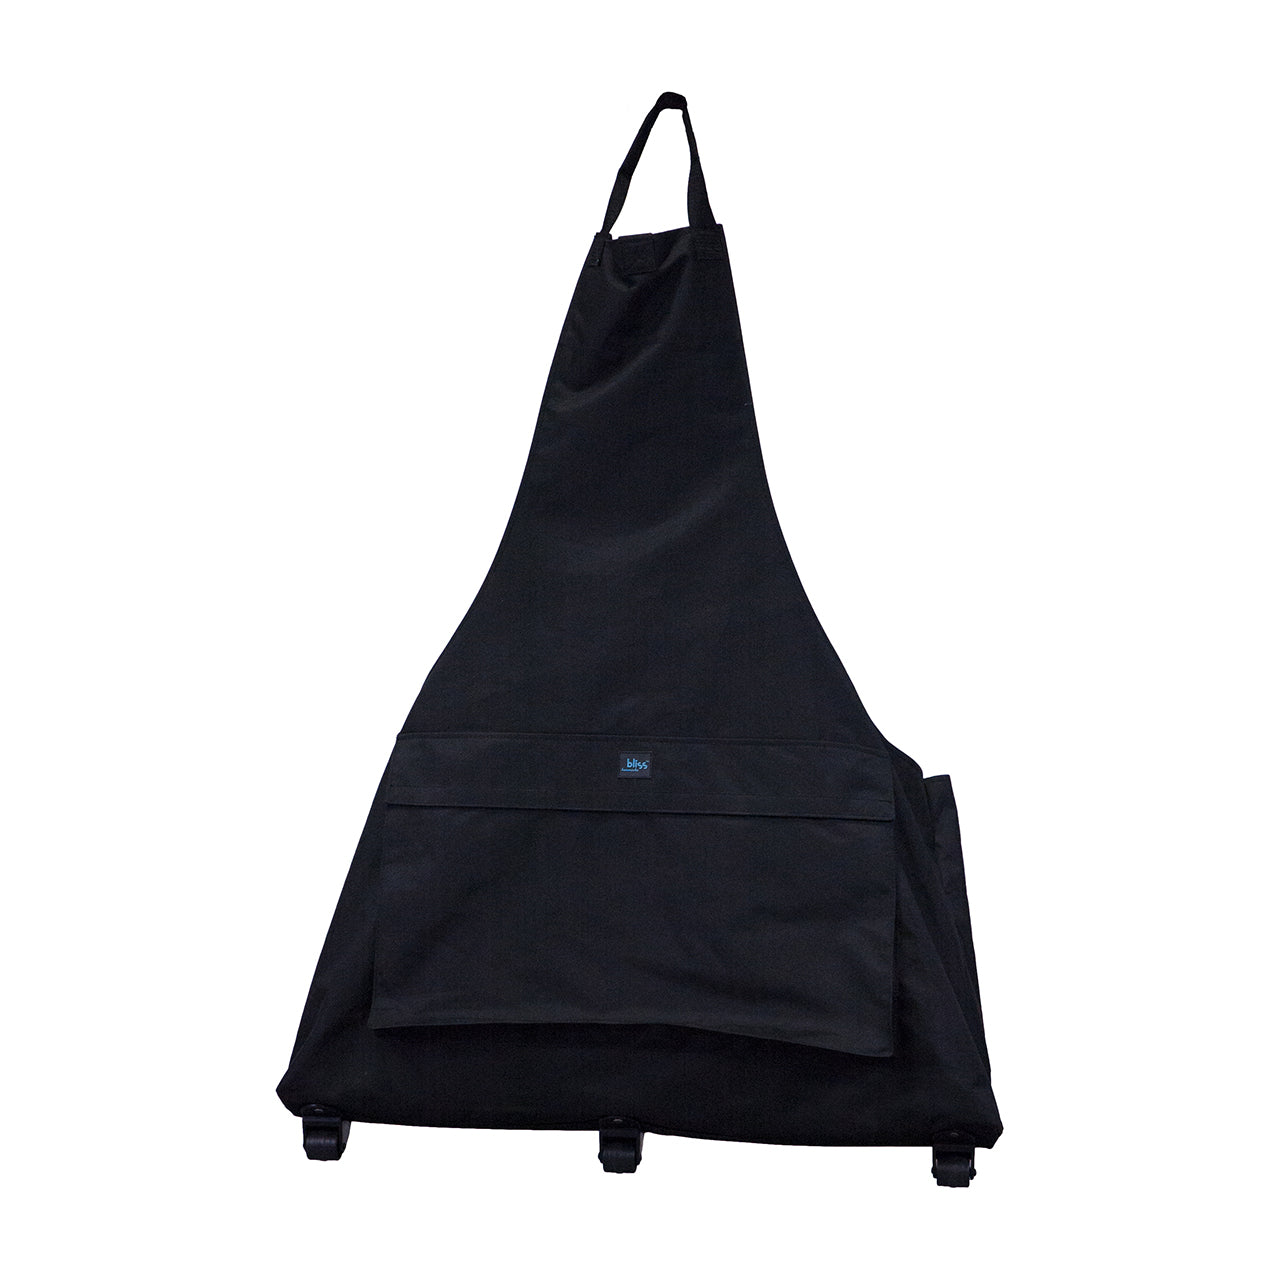 Front view of the Bliss Hammocks Gravity Free Chair Carrying Backpack Bag.